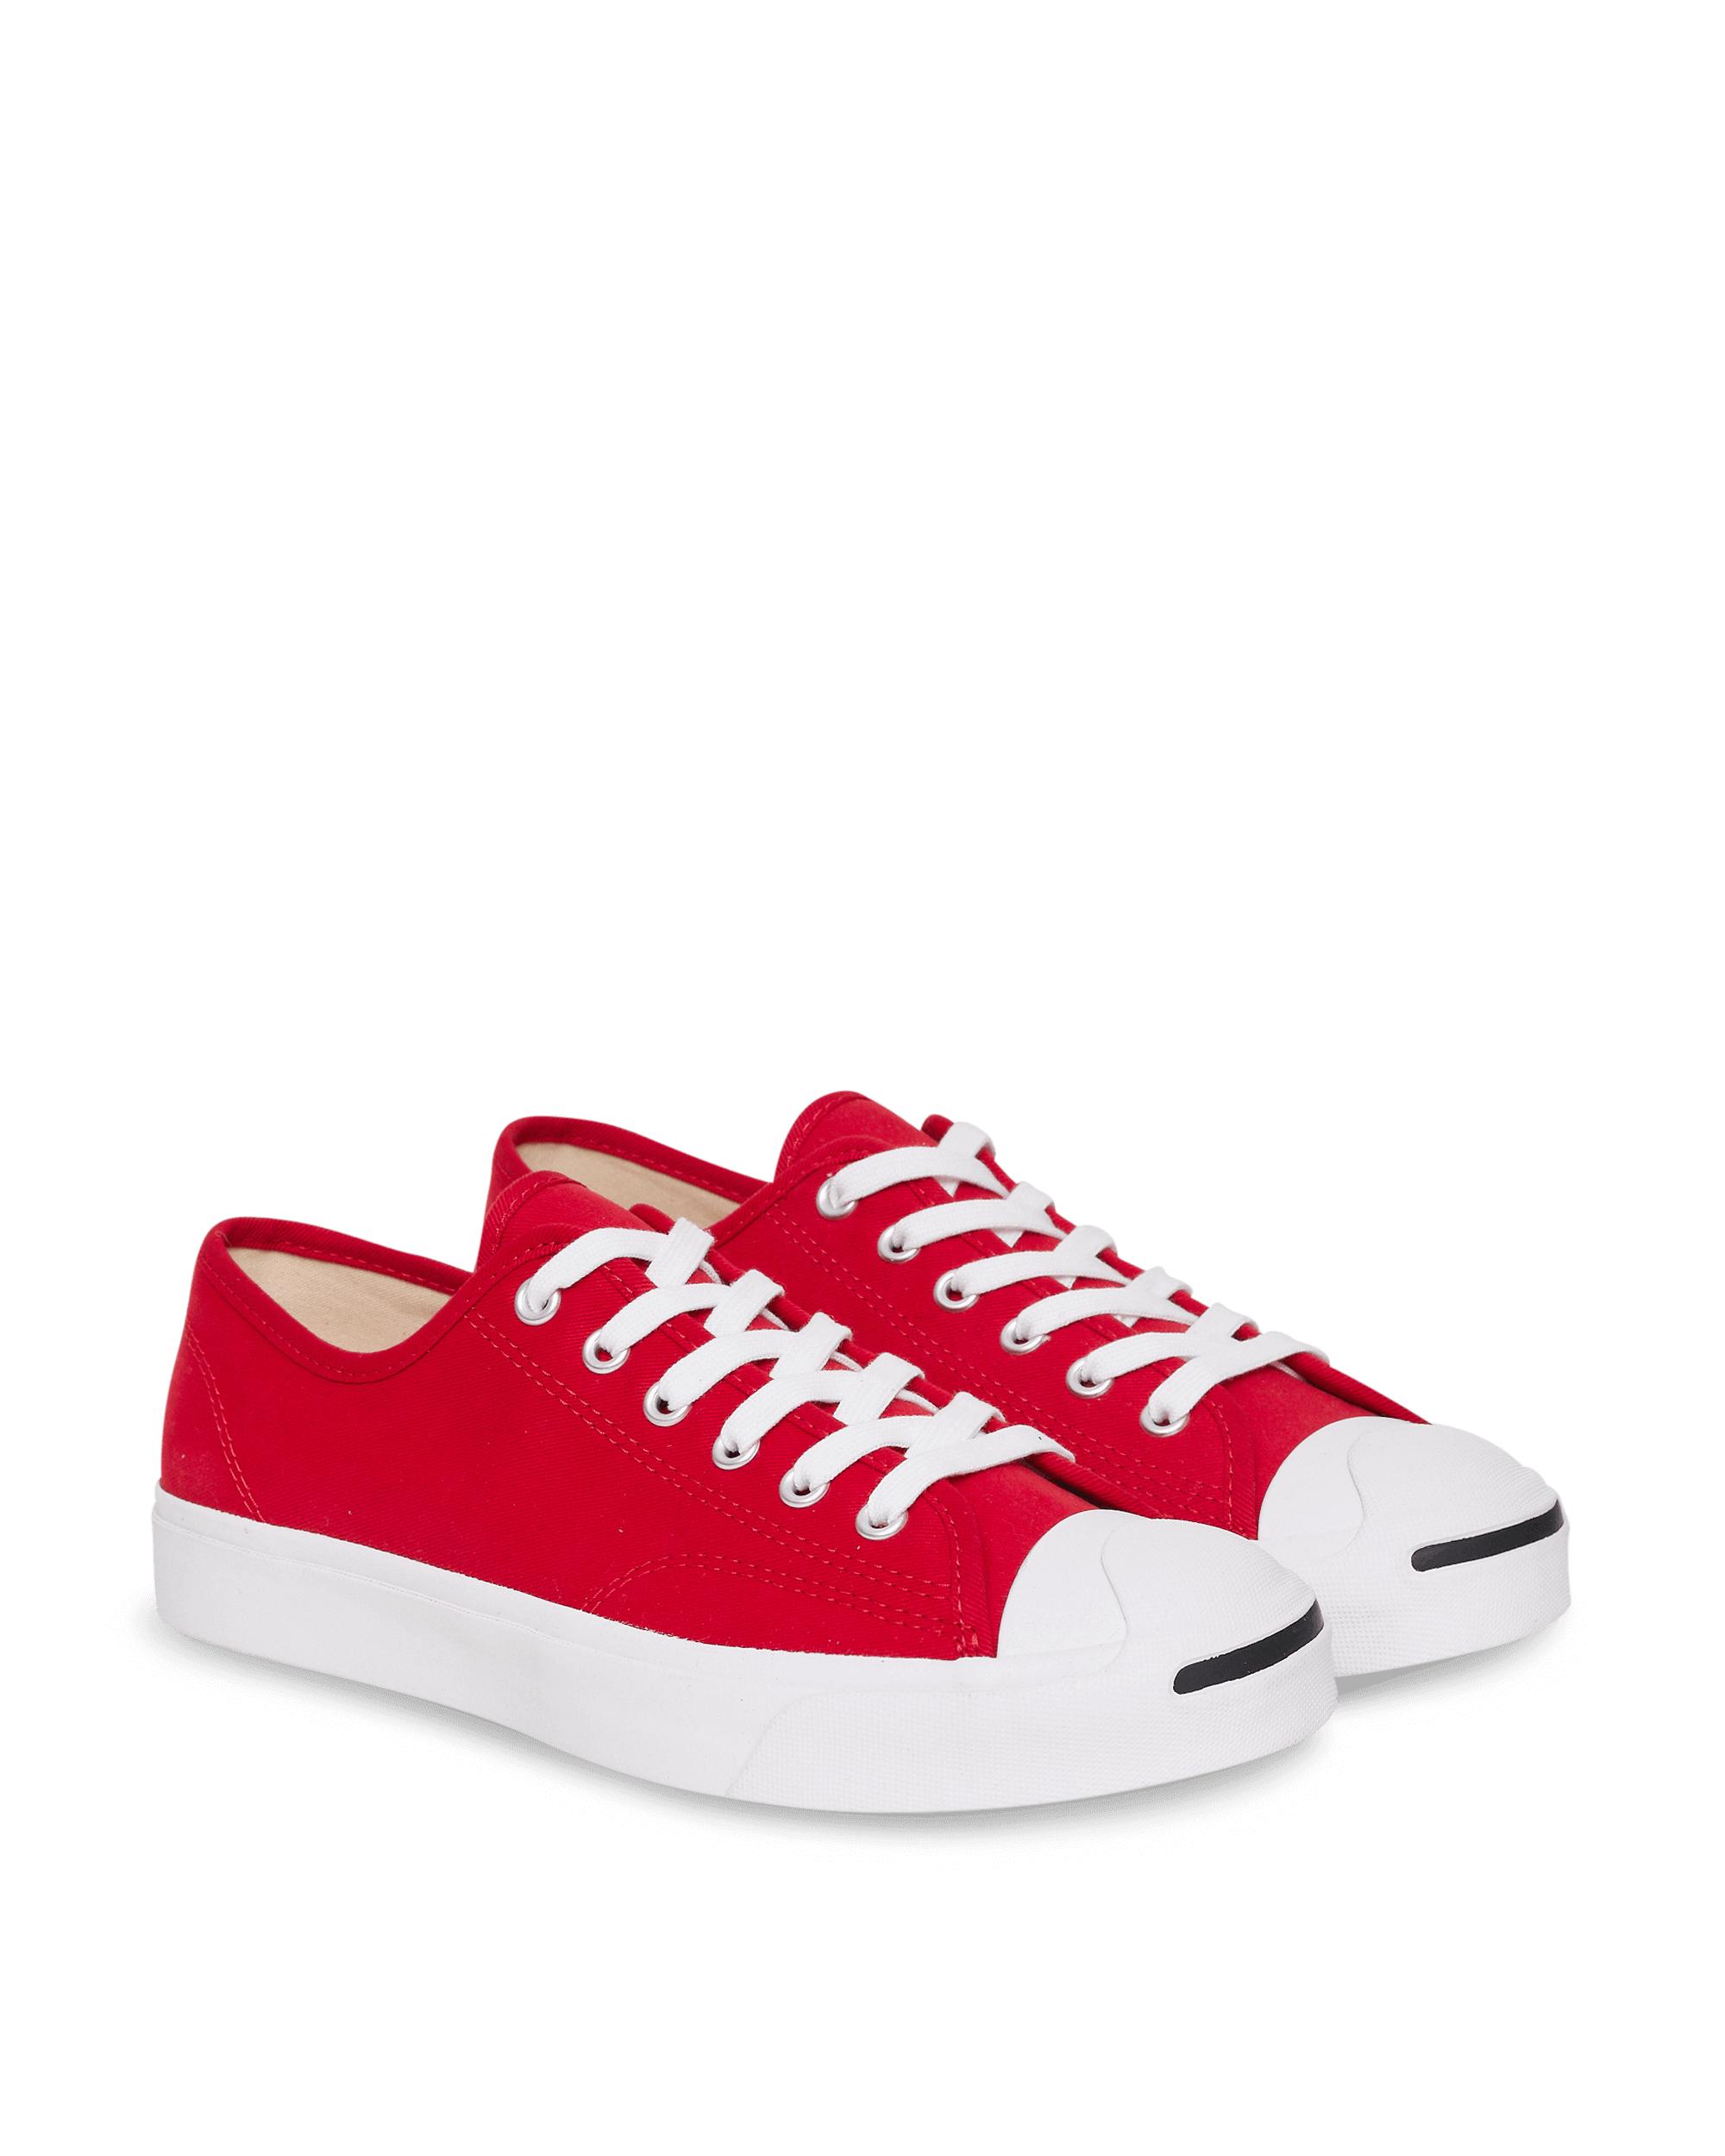 Converse Jack Purcell Sneakers in Red for Men - Lyst